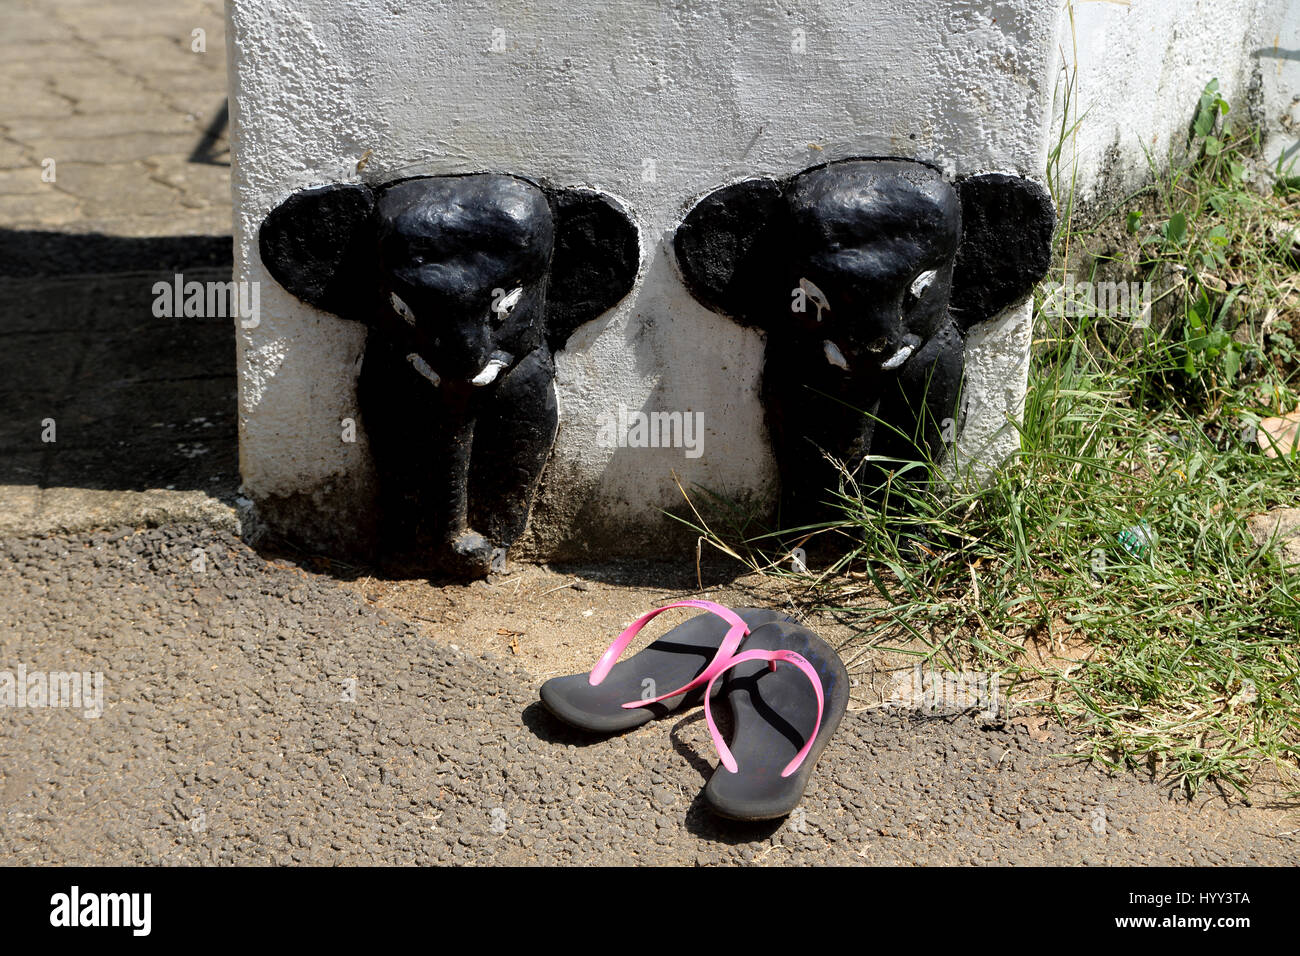 Aluviharaya Rock Cave Temple Sri Lanka Matale District Kandy-Dambulla Highway A Pair Of Flip Flops Infront Of Carved Elephants on Wall outside Dagoba Stock Photo